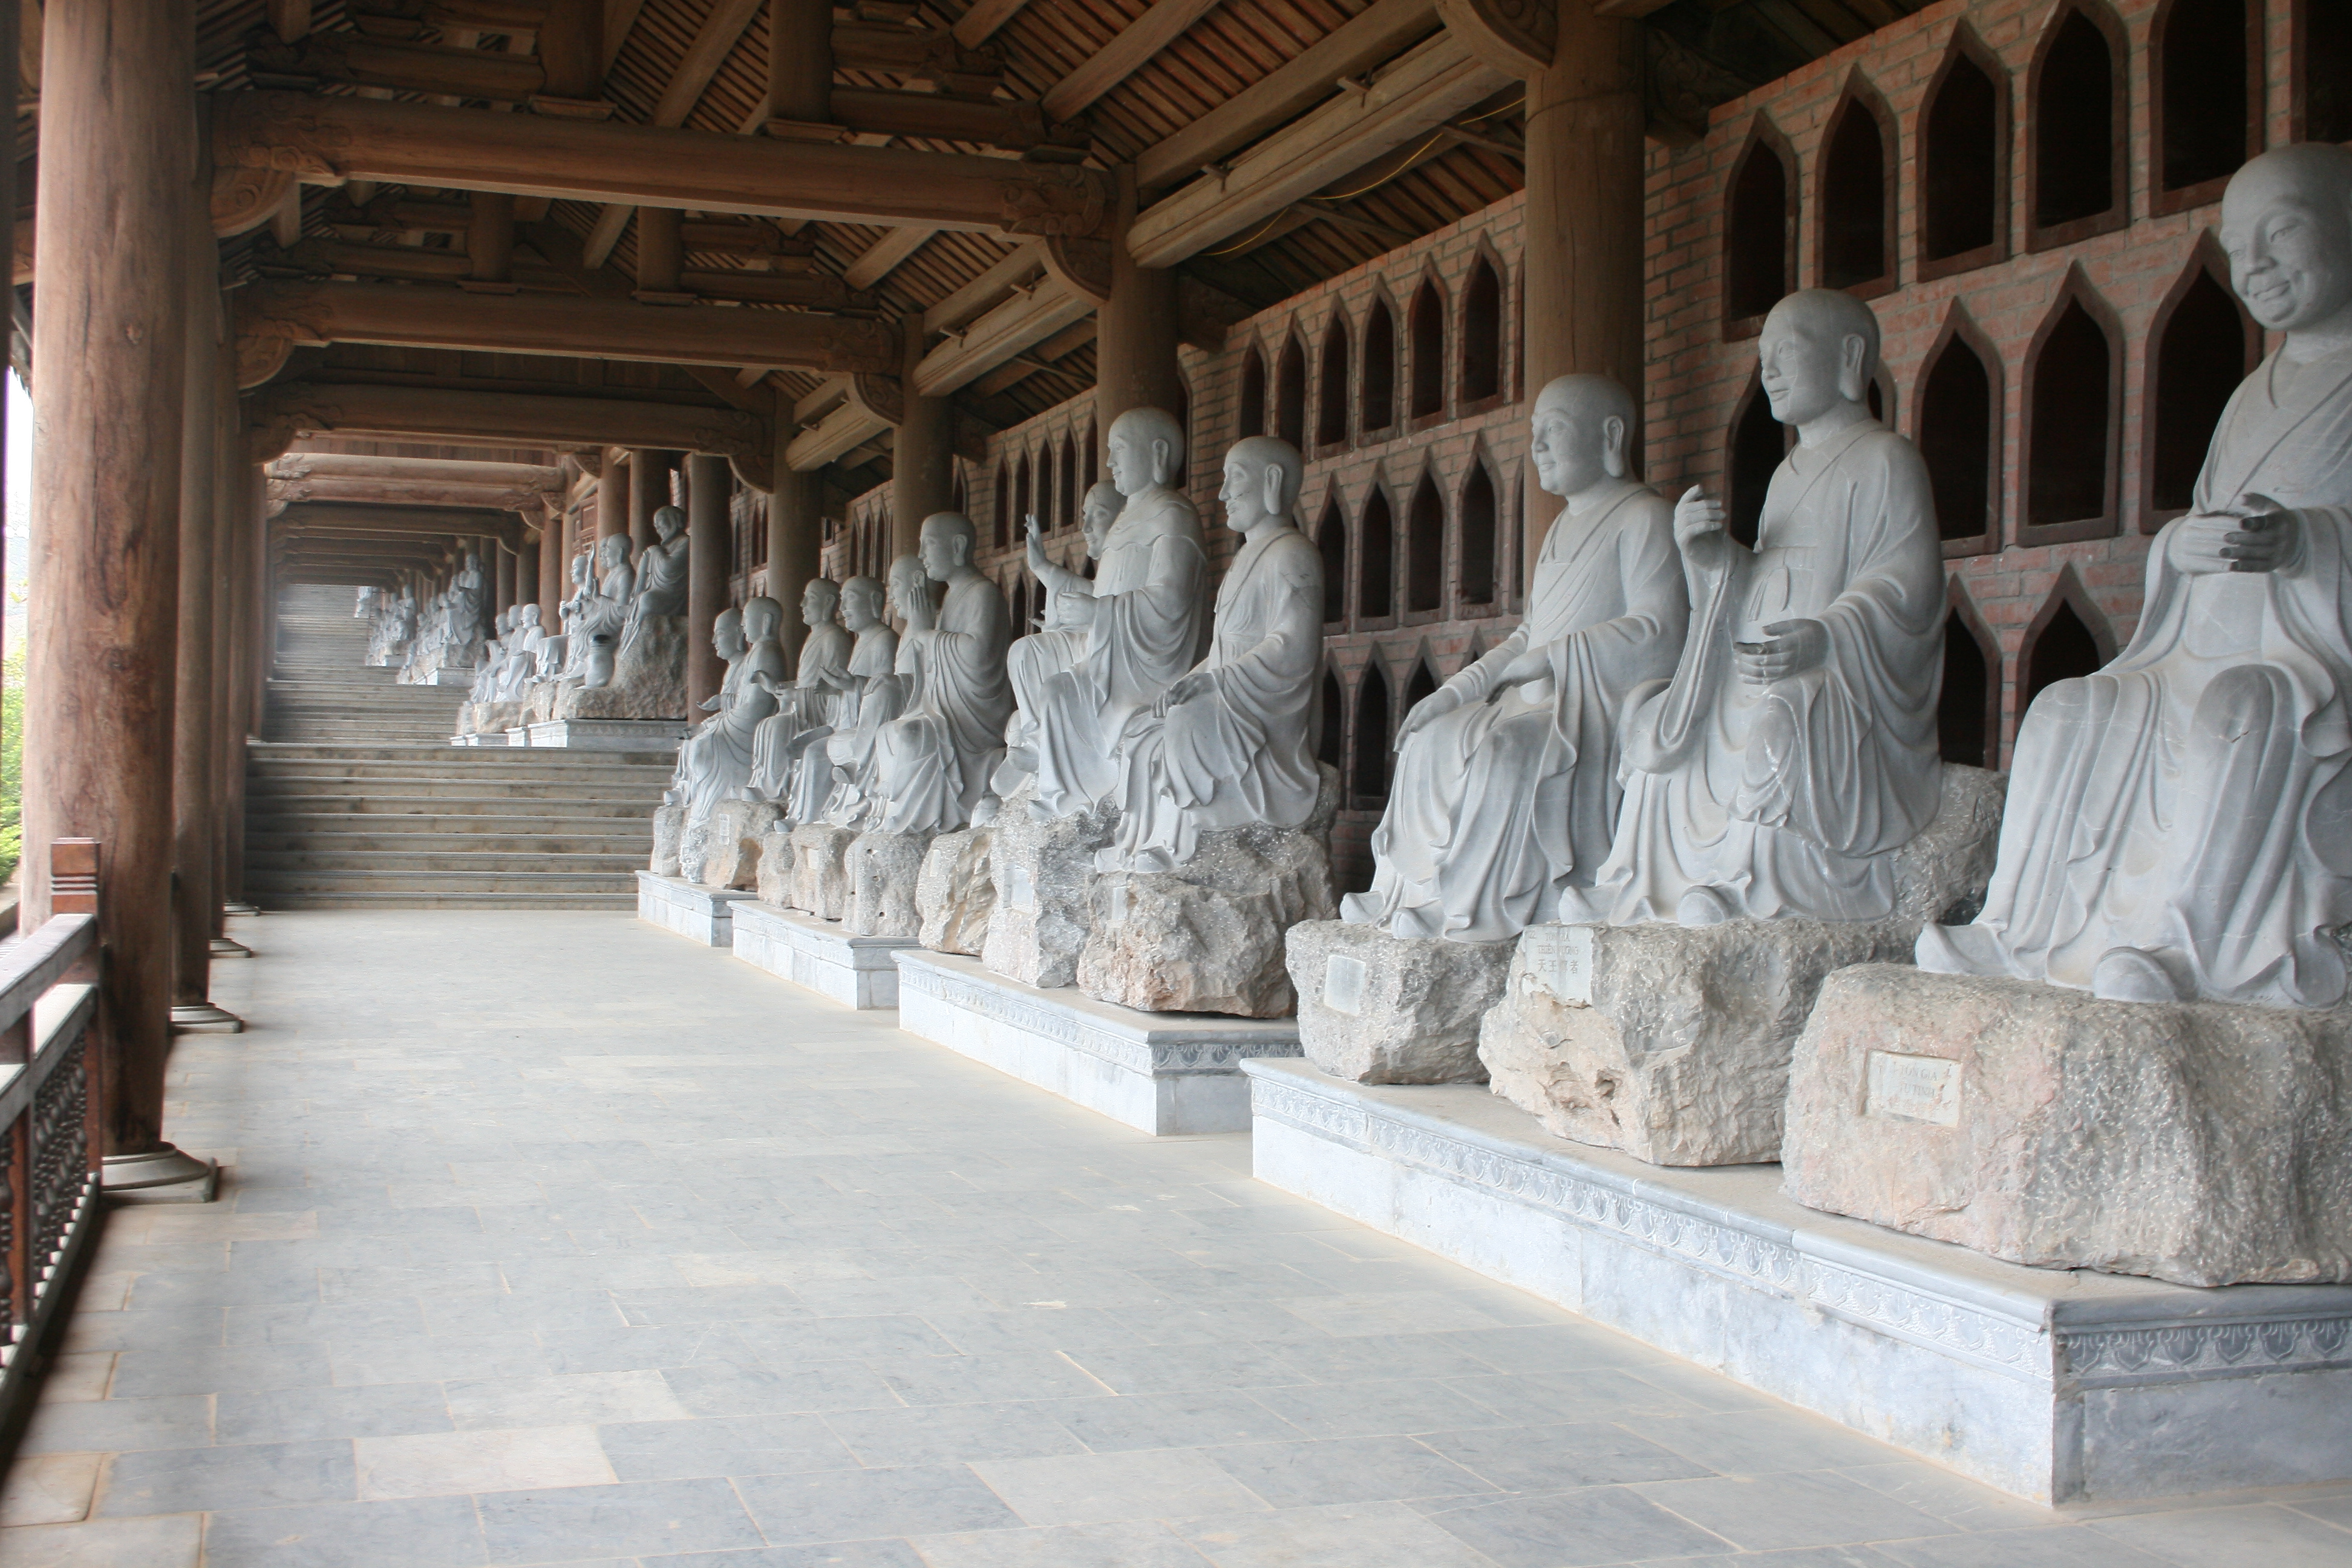 The longest Corridor with 500 Arhat statues The longest Corridor with 500 Arhat statues The longest Corridor with 500 Arhat statues